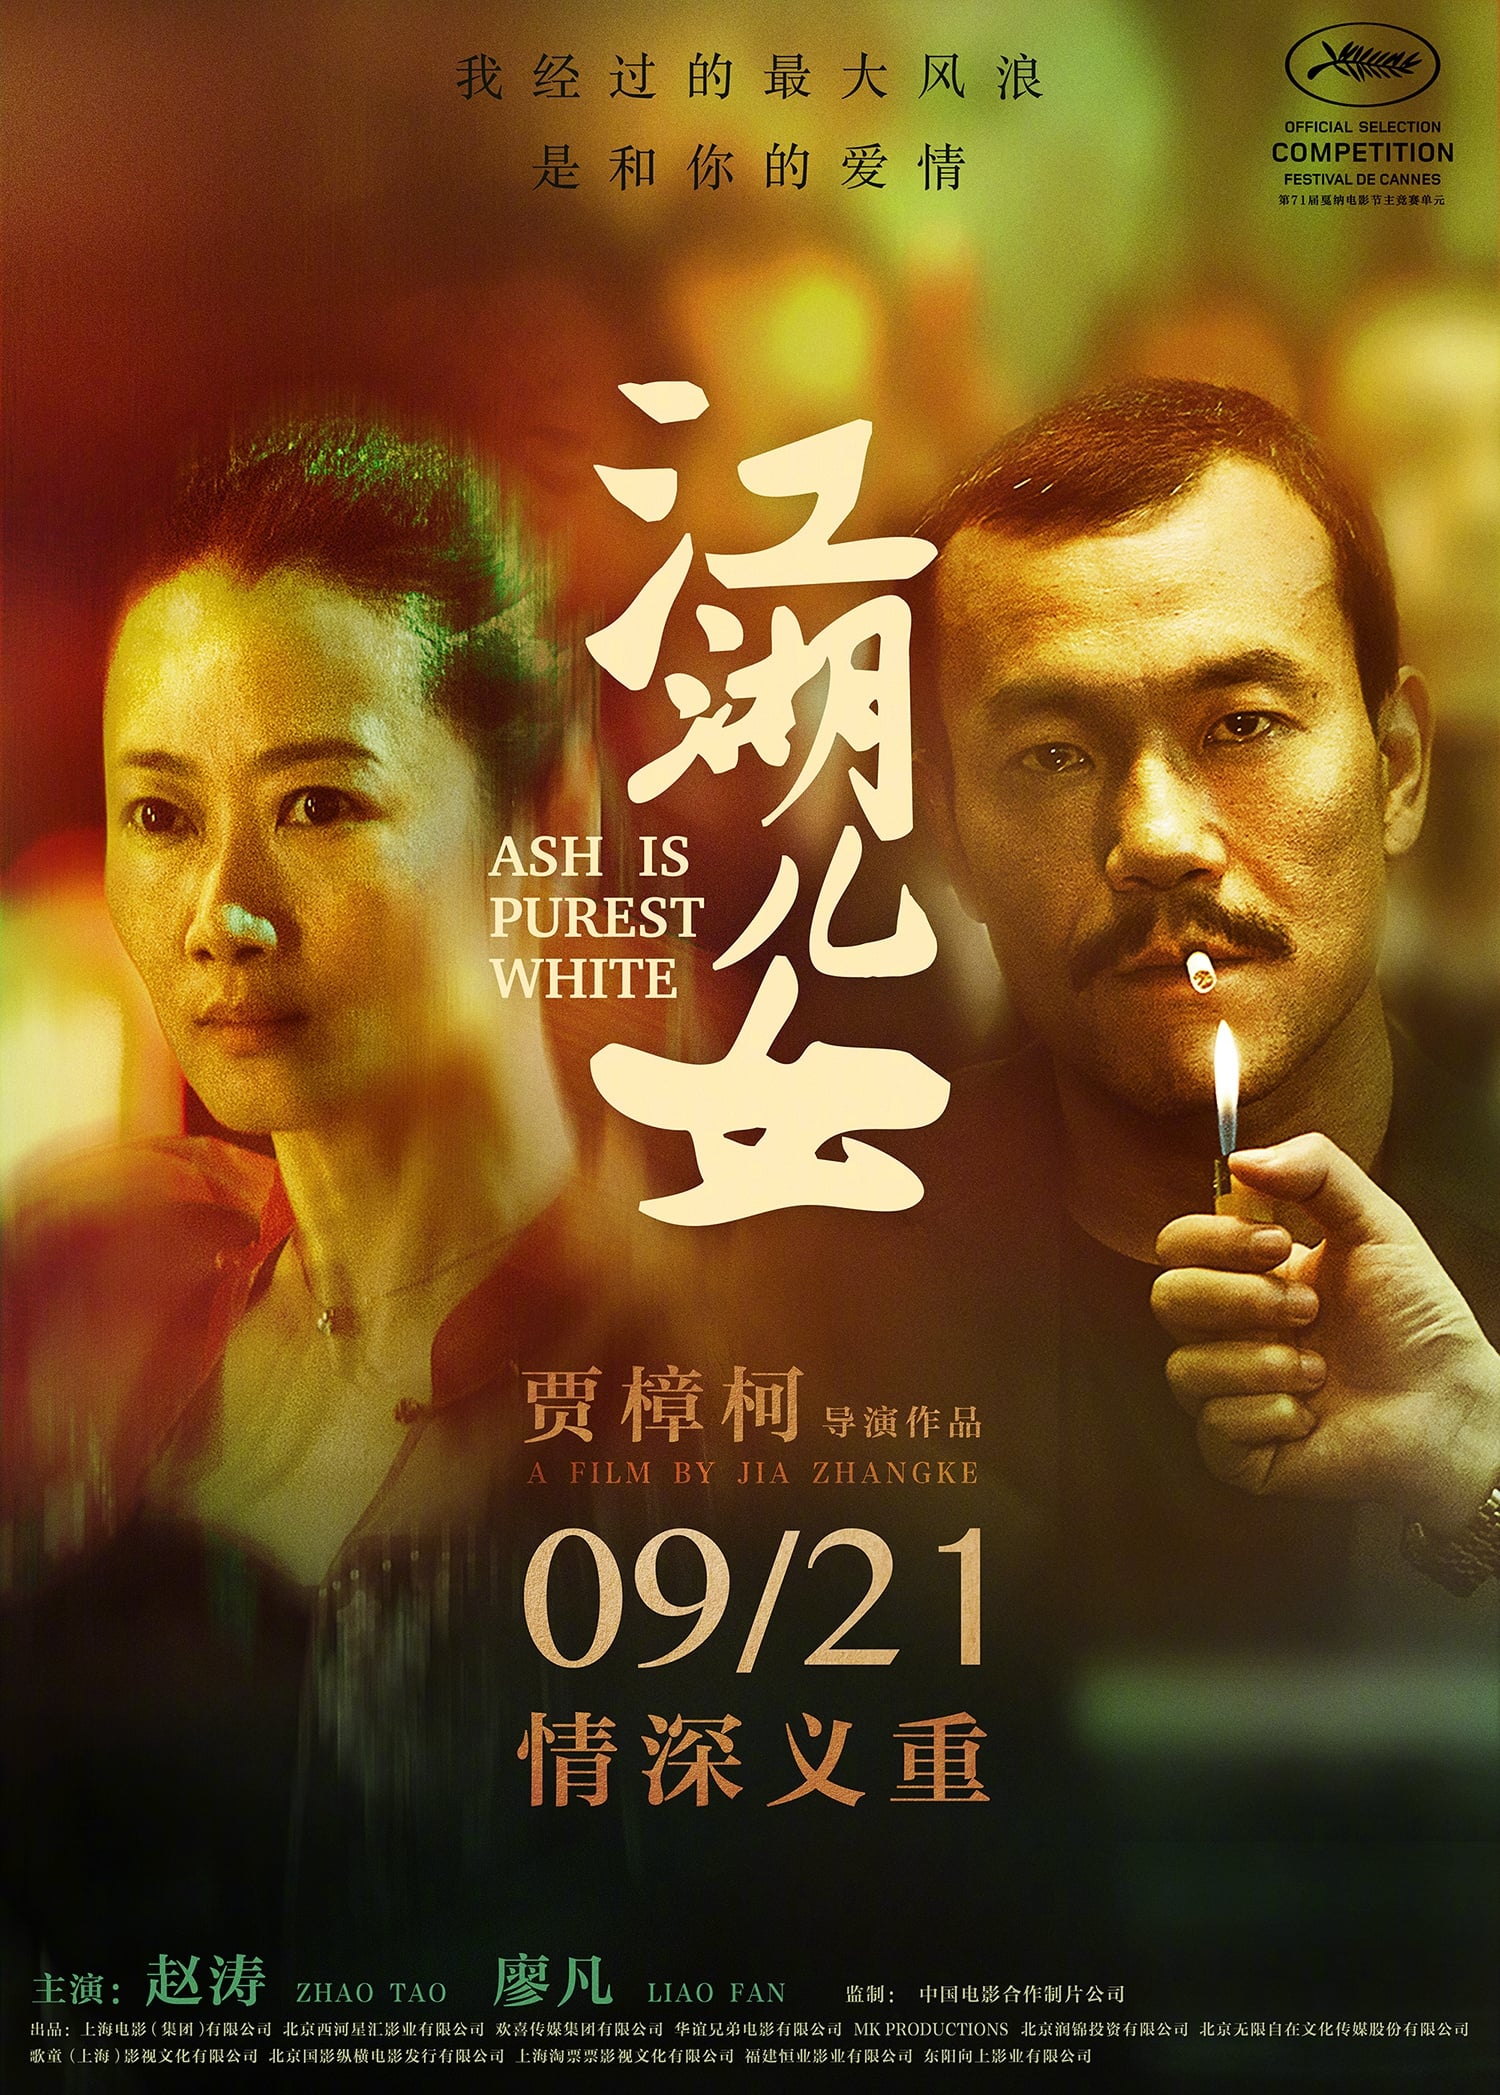 Banner Phim Giang Hồ Nữ Nhi (Ash is Purest White)